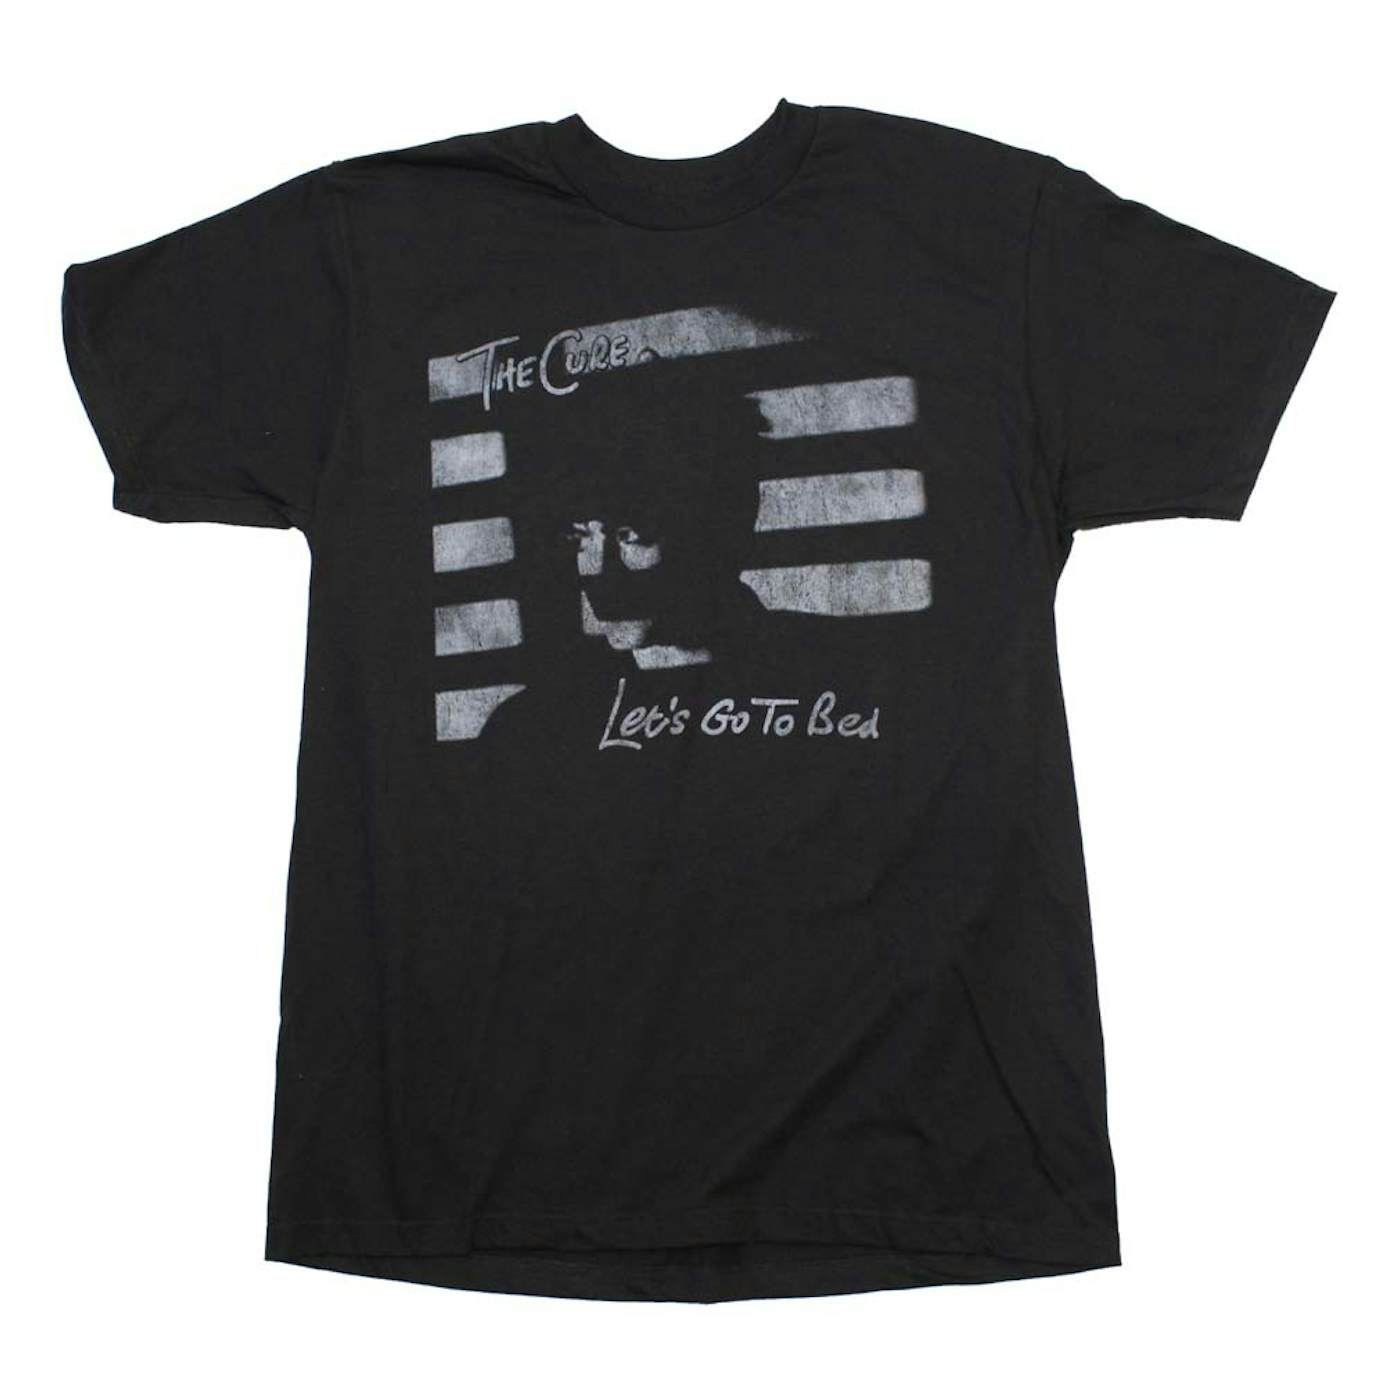 The Cure T Shirt | The Cure Let's Go to Bed T-Shirt